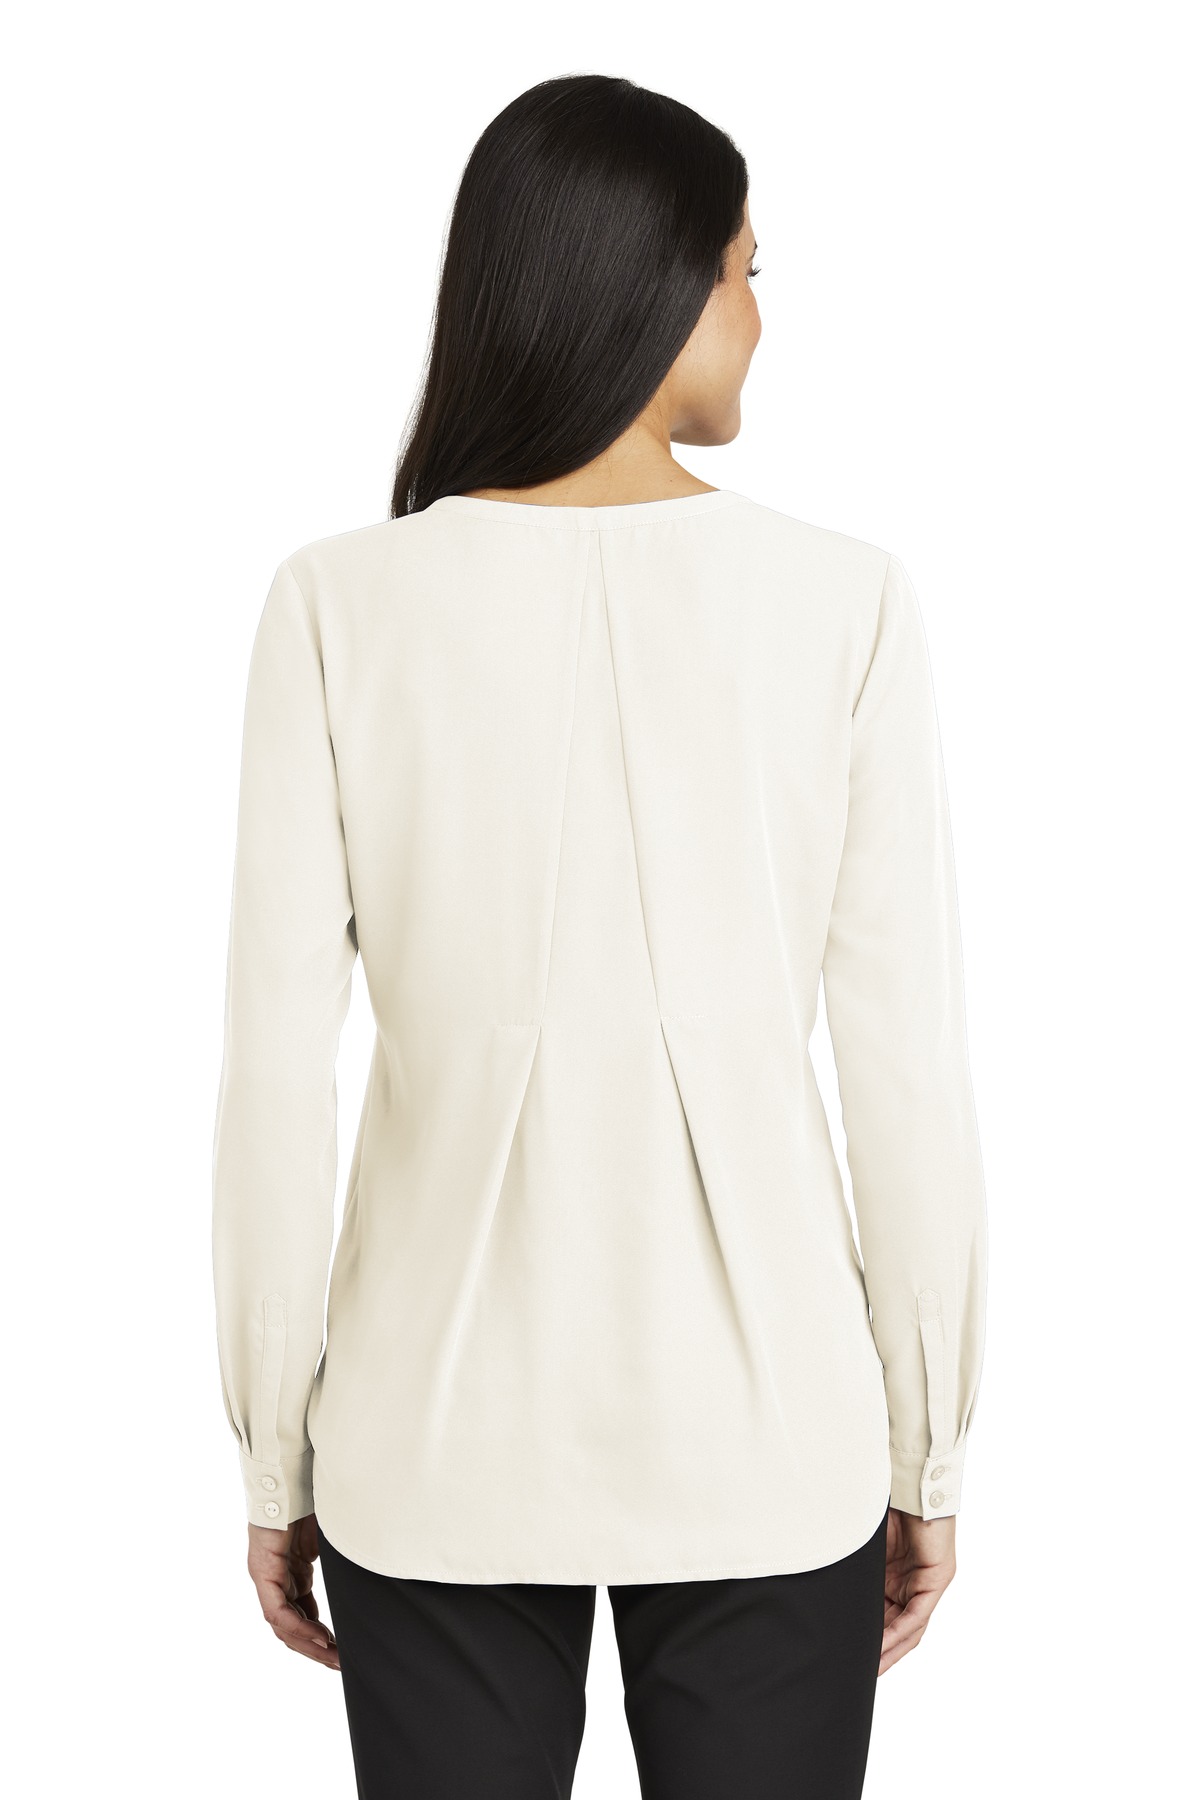 Port Authority Women's Long Sleeve Button-Front Blouse. LW700 - image 2 of 4